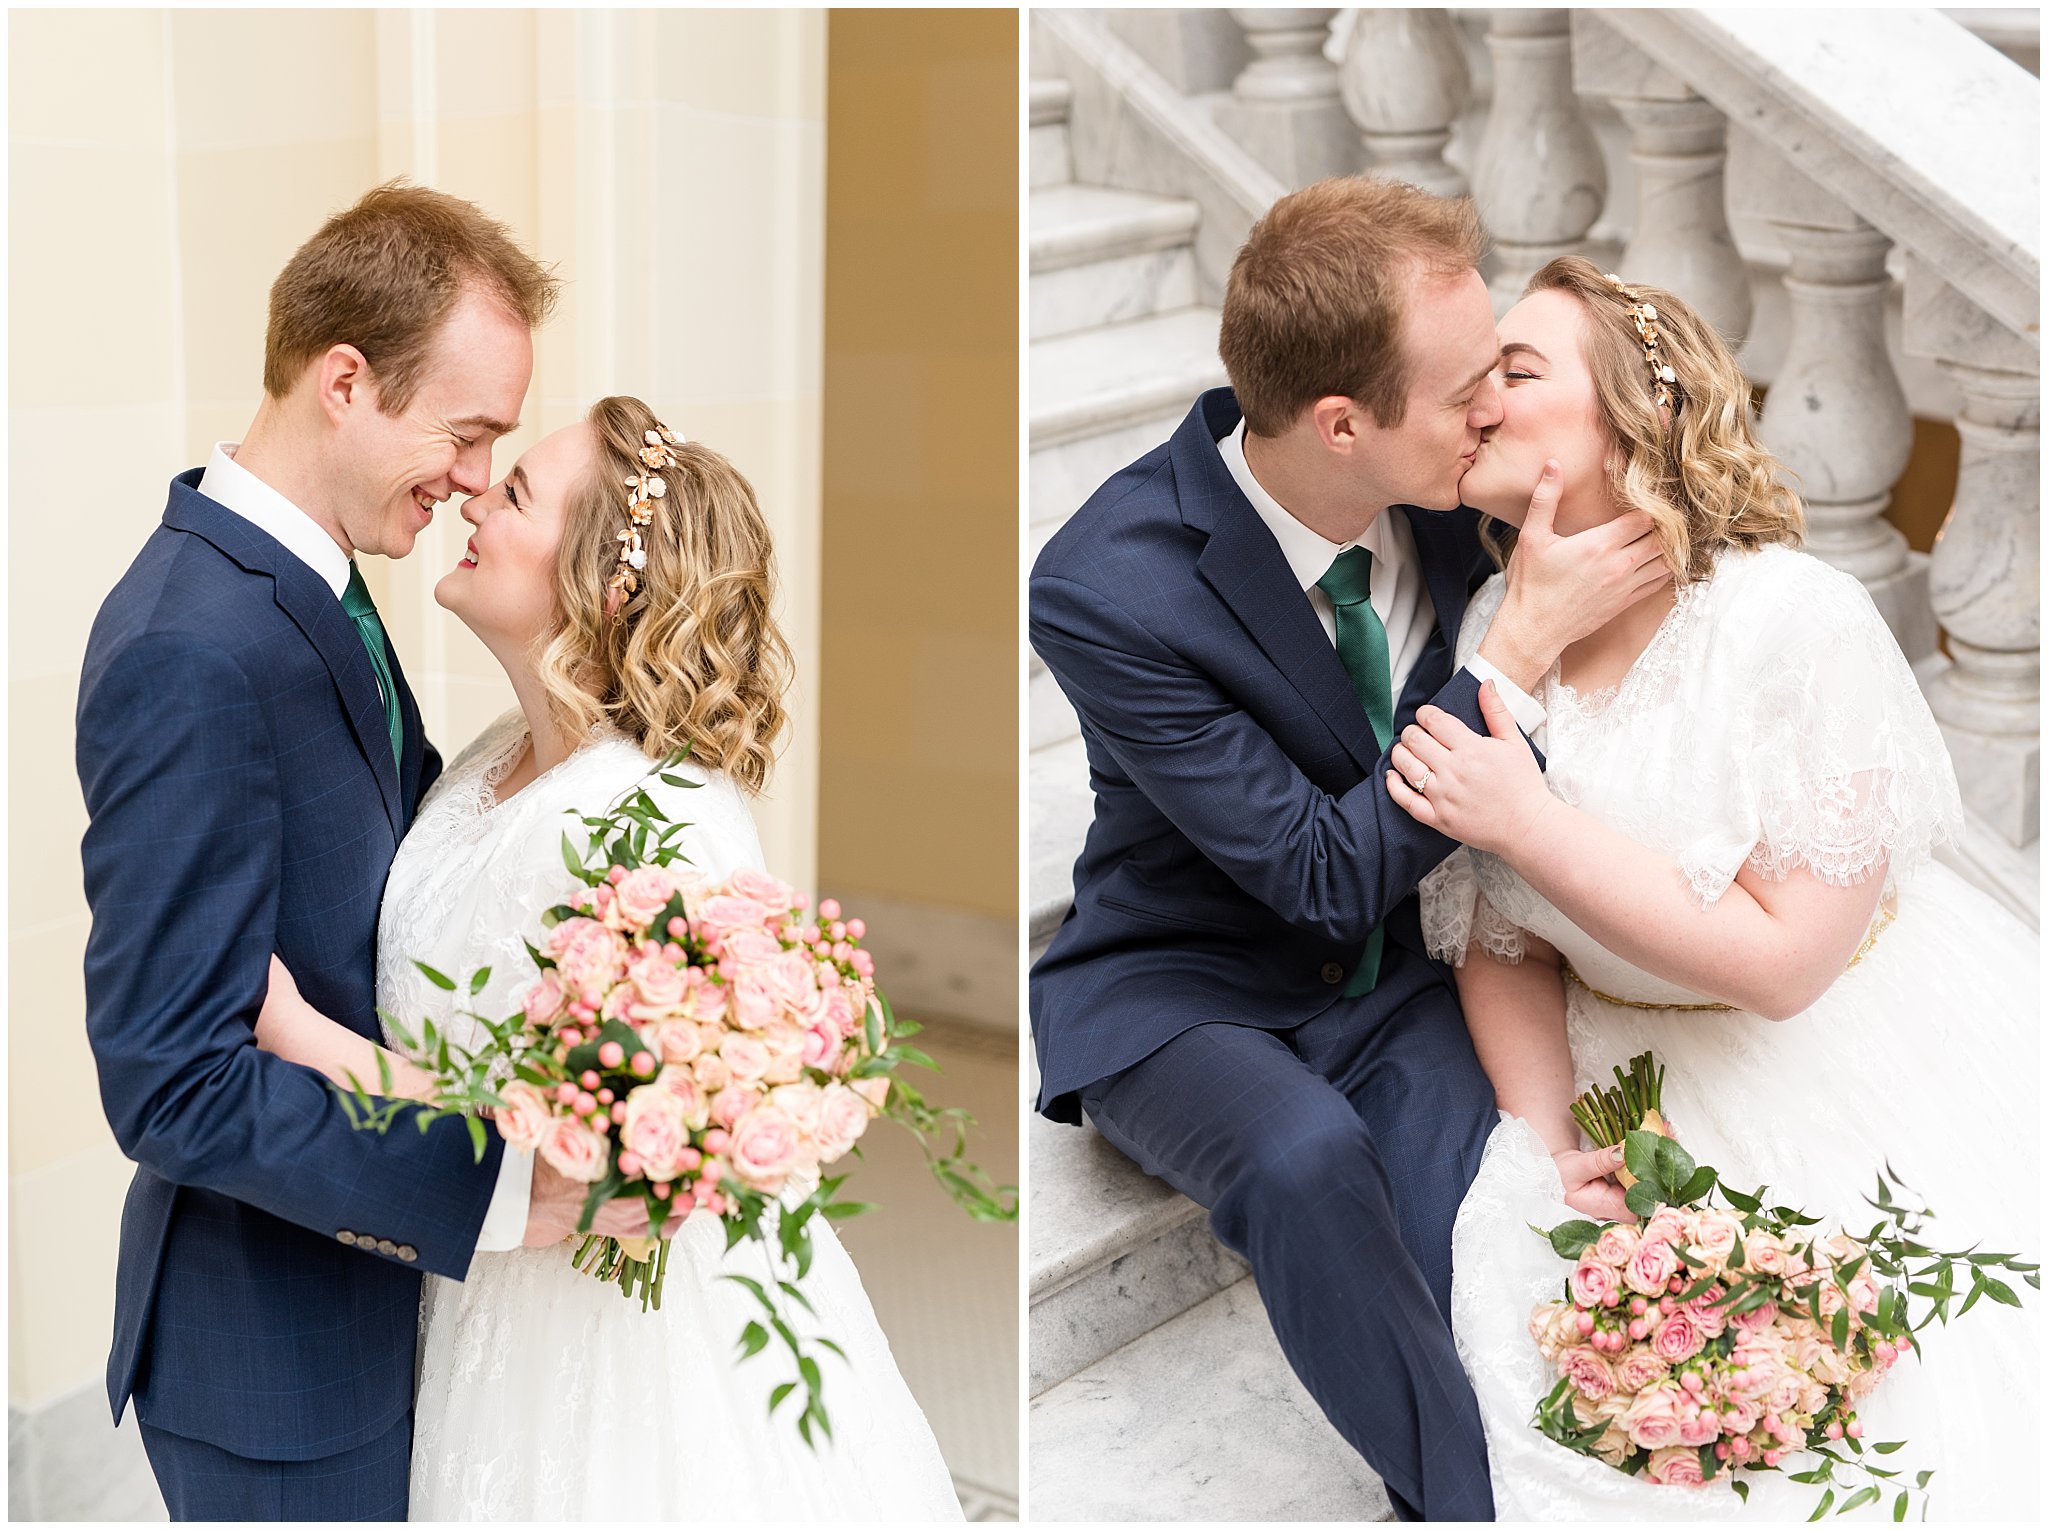 Bride and groom on steps of grand staircase | Winter Formals at the Utah State Capitol | Utah Wedding Photography